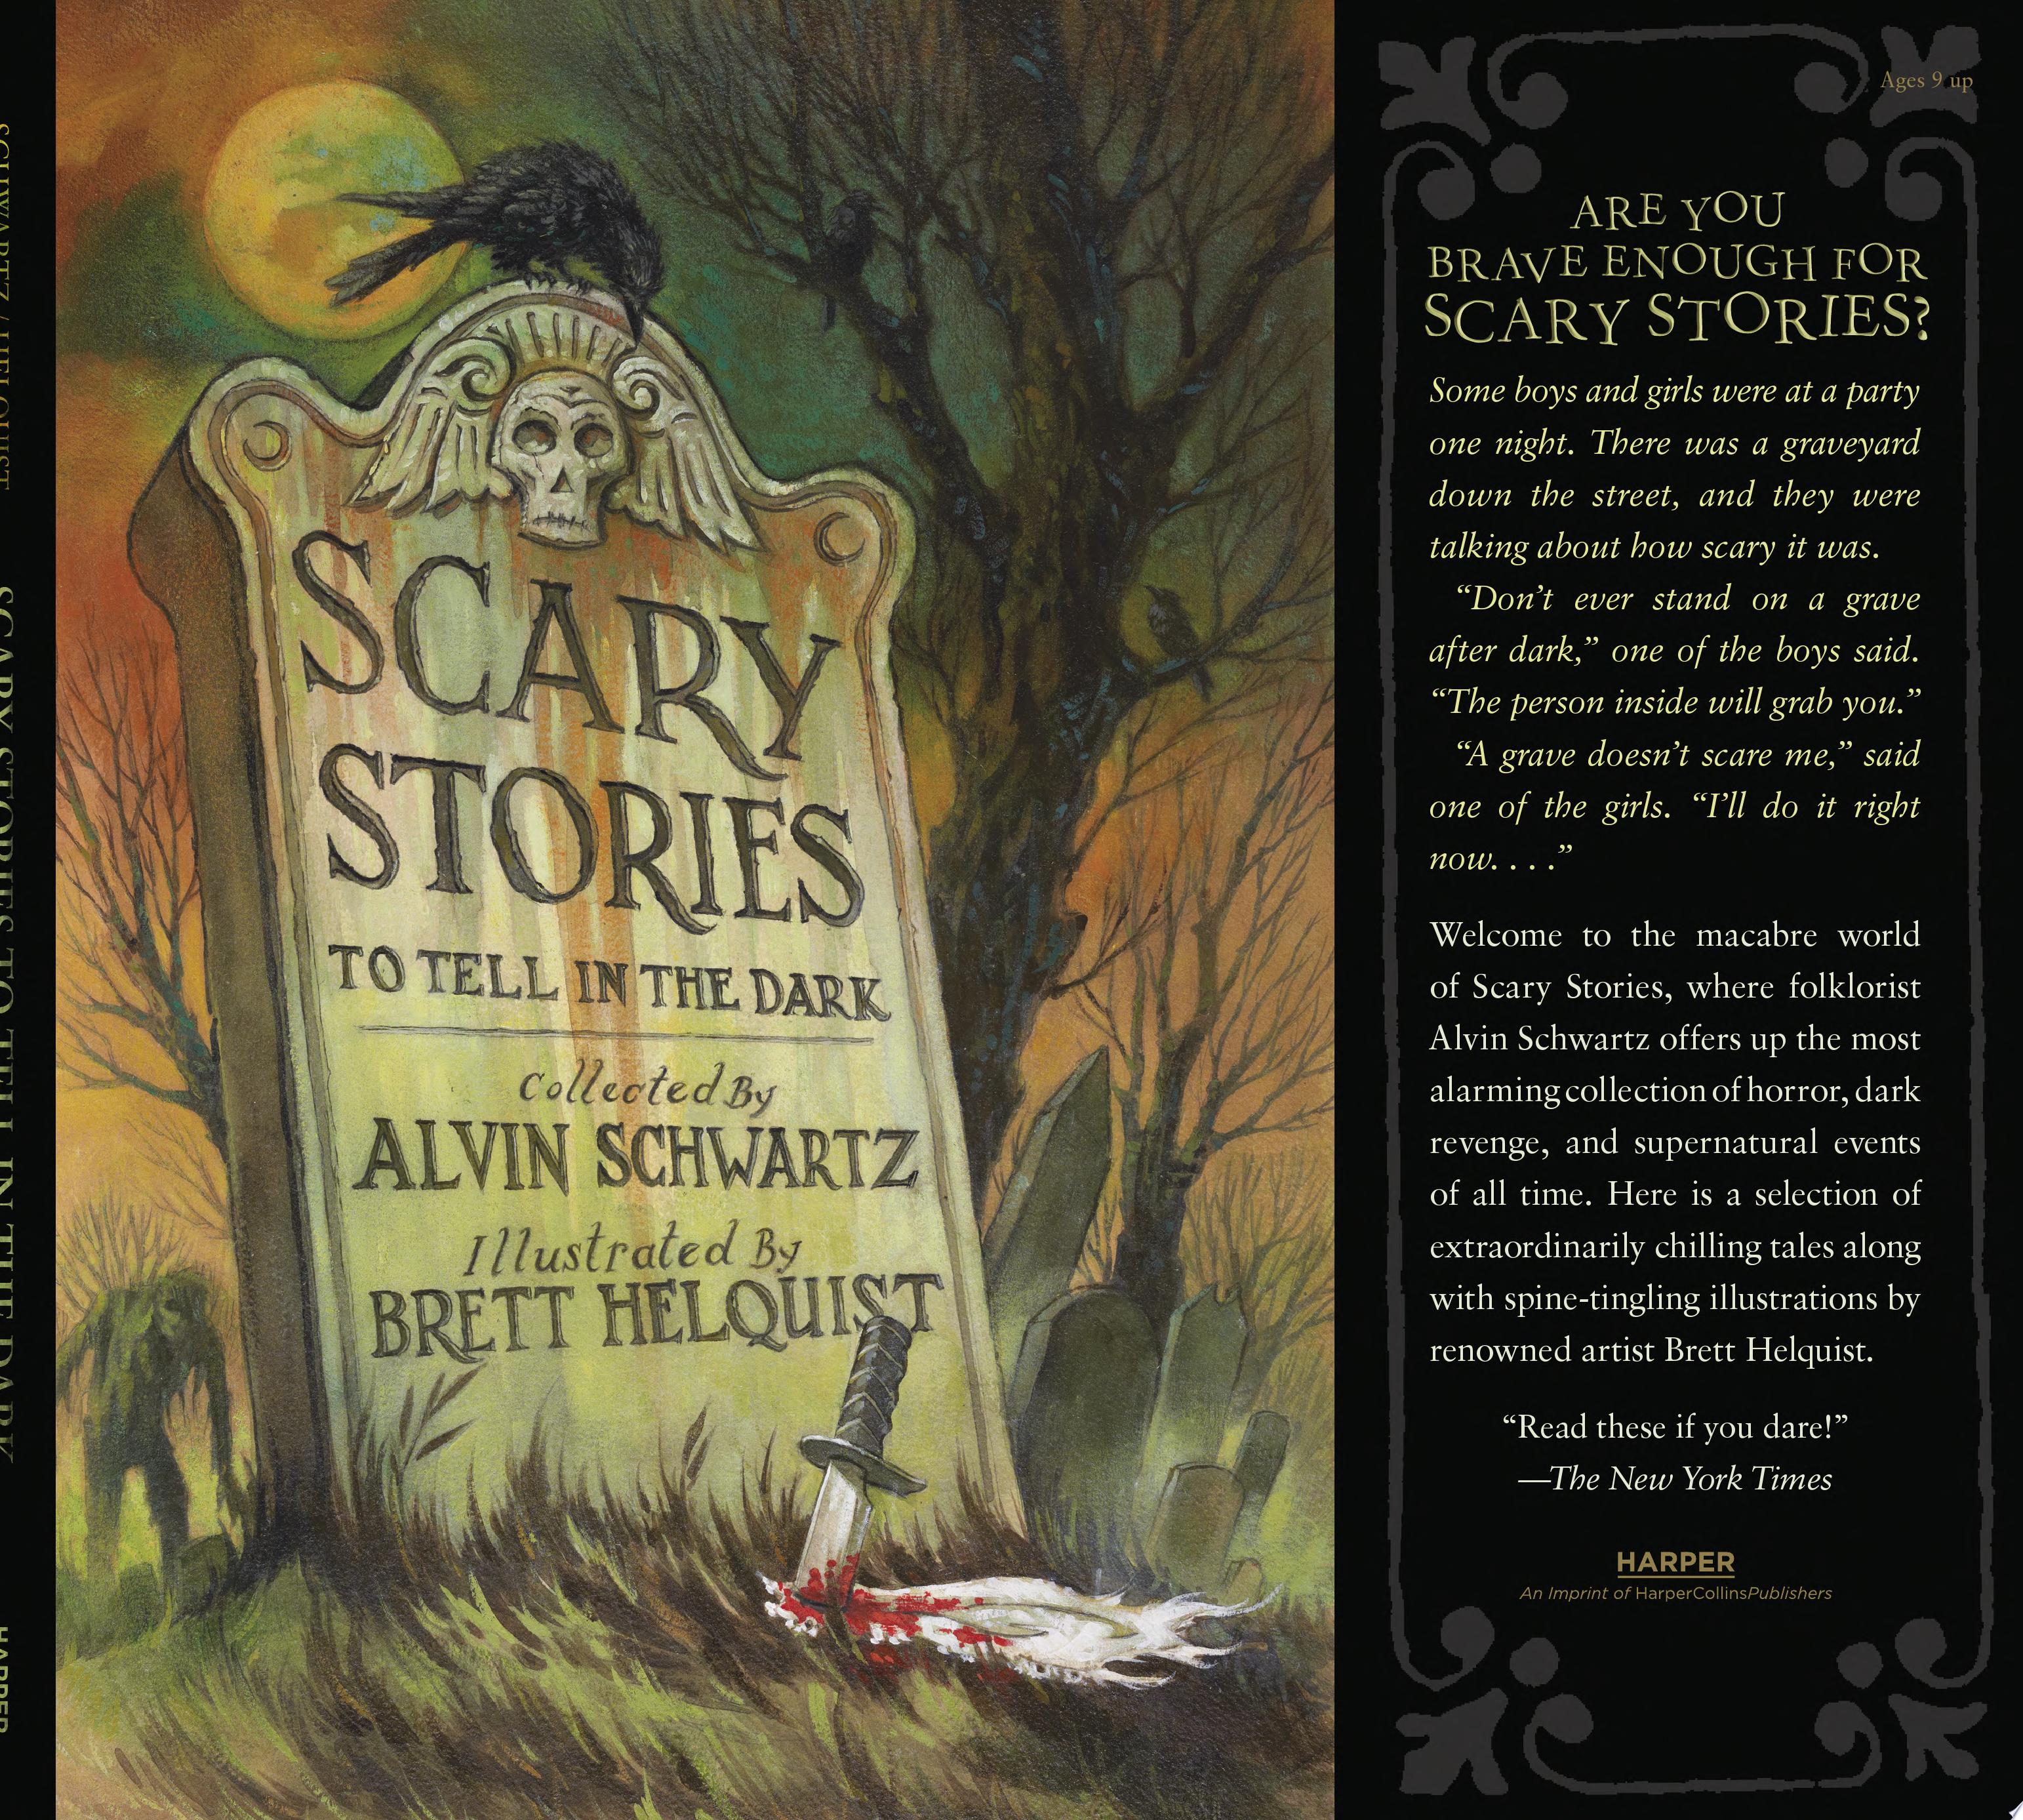 Image for "Scary Stories to Tell in the Dark"